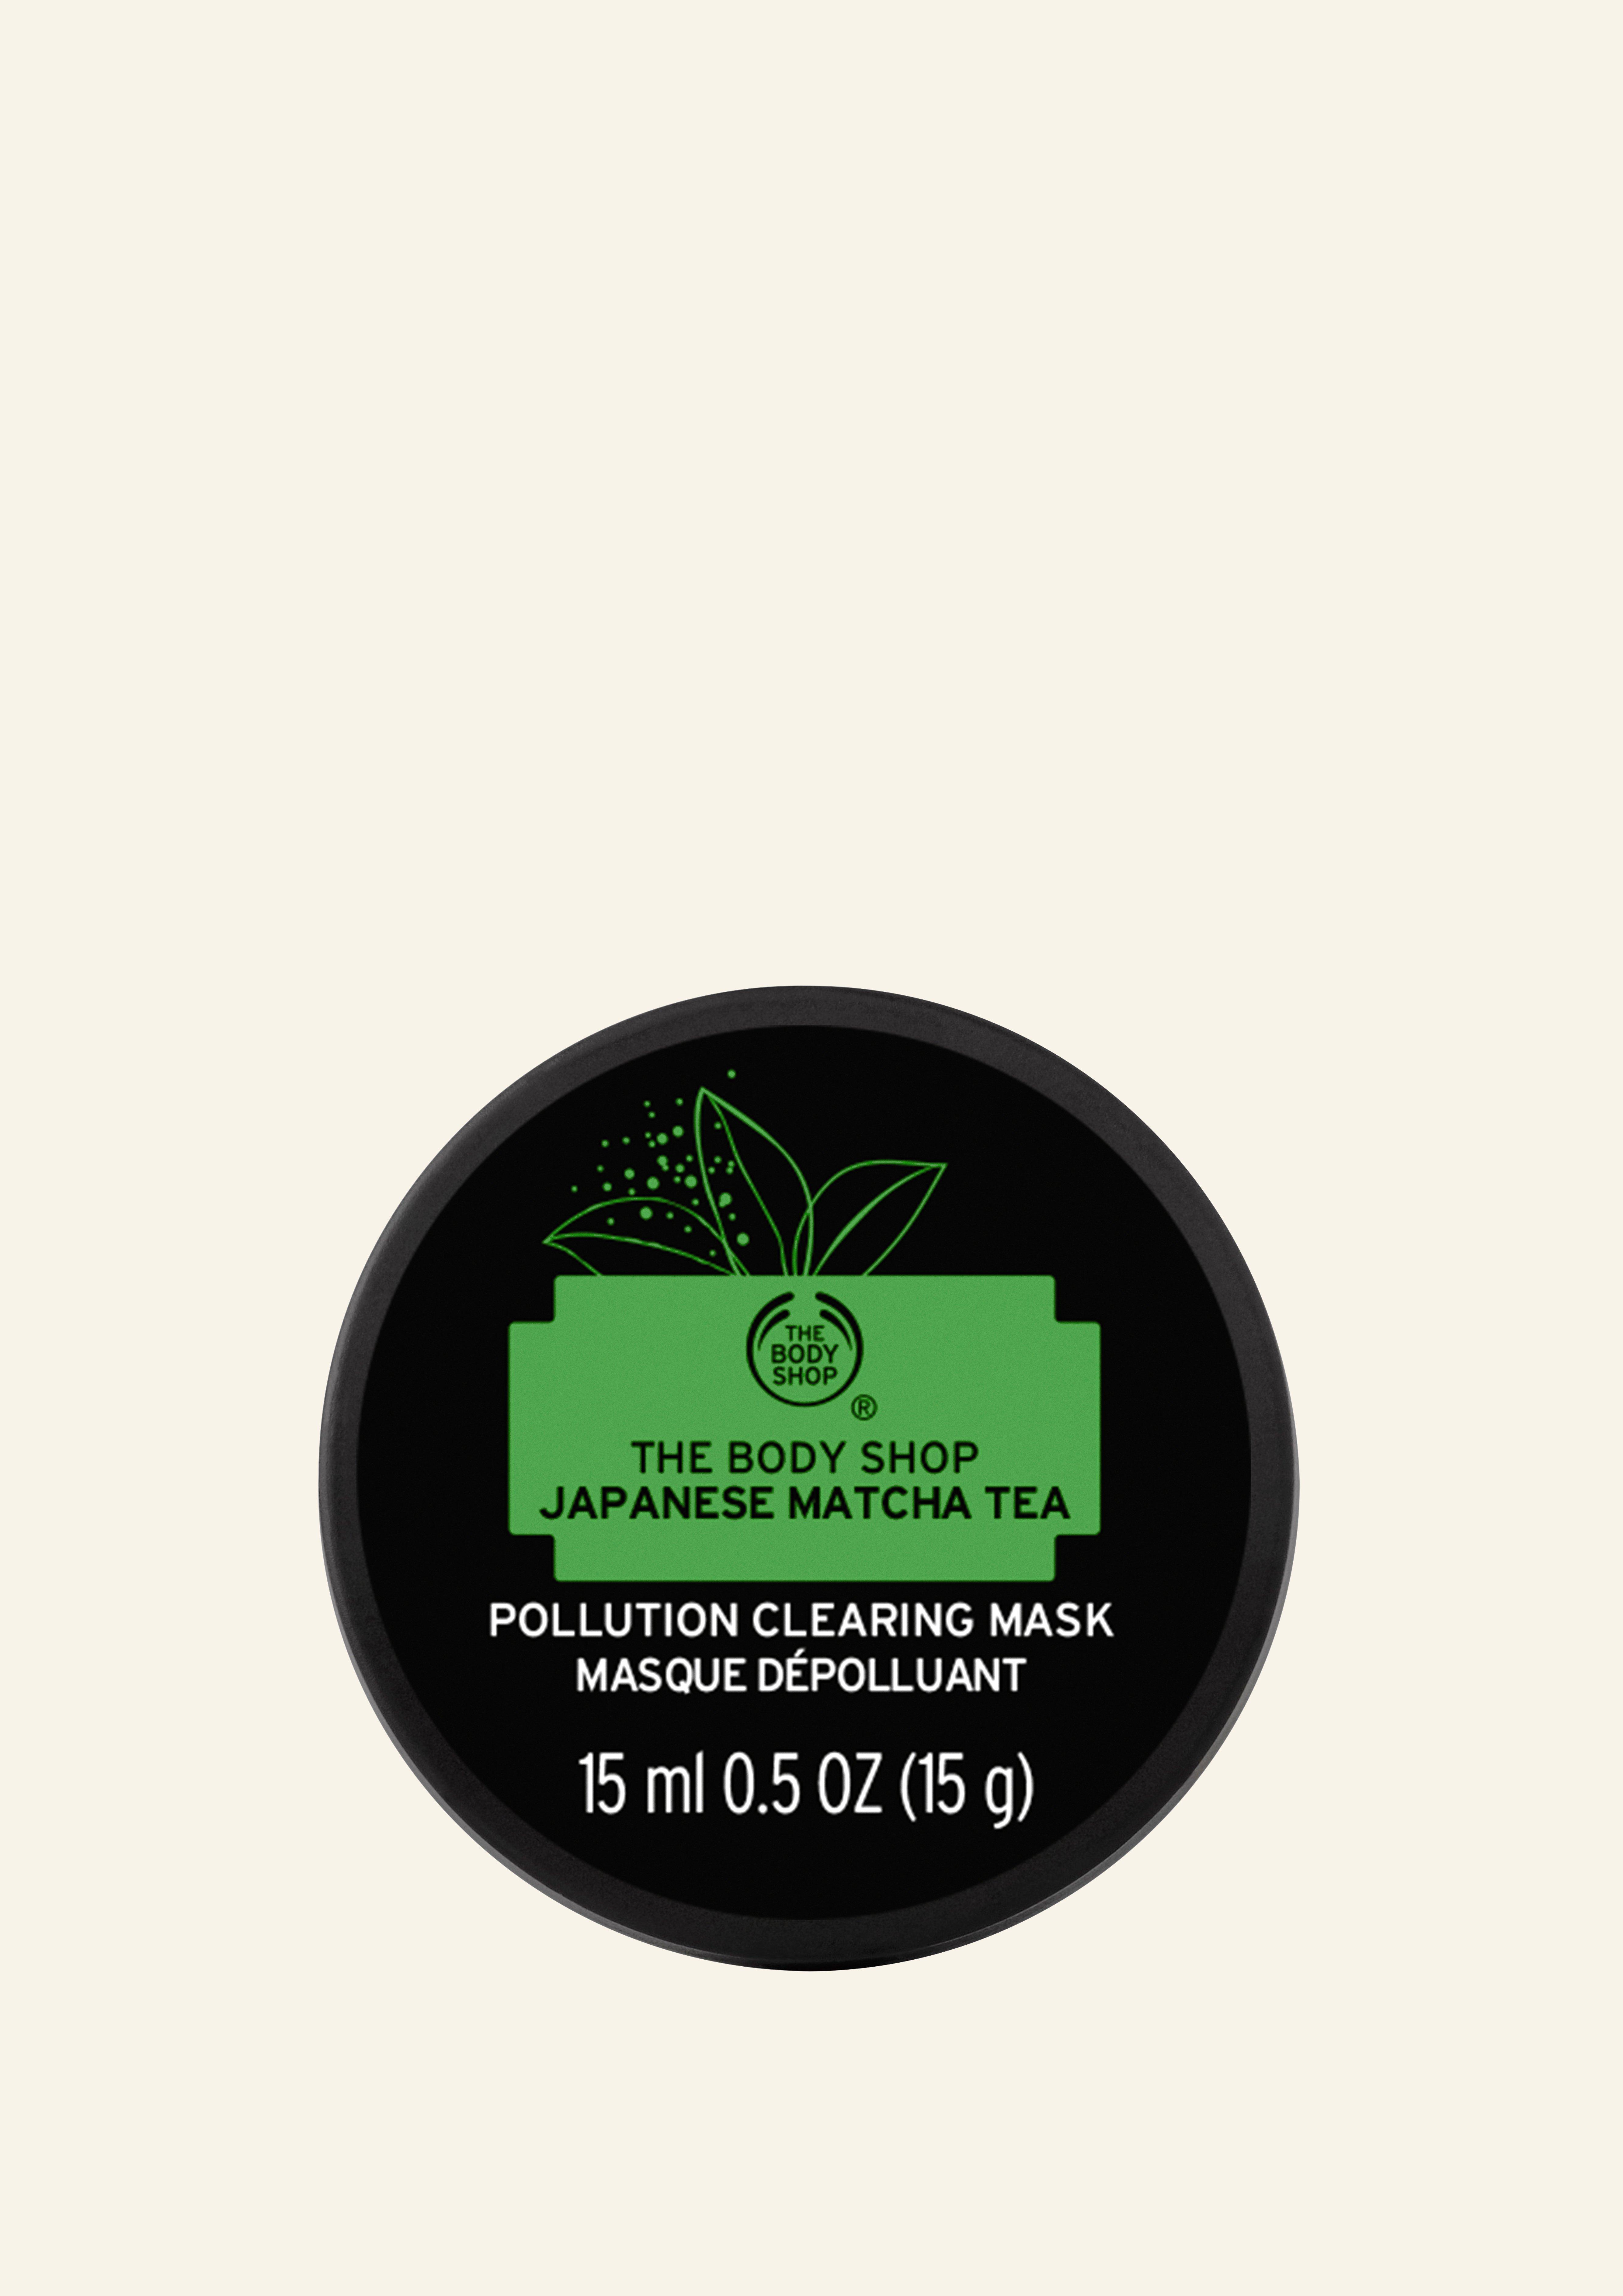 Japanese Matcha Tea Pollution Clearing Mask 15ml